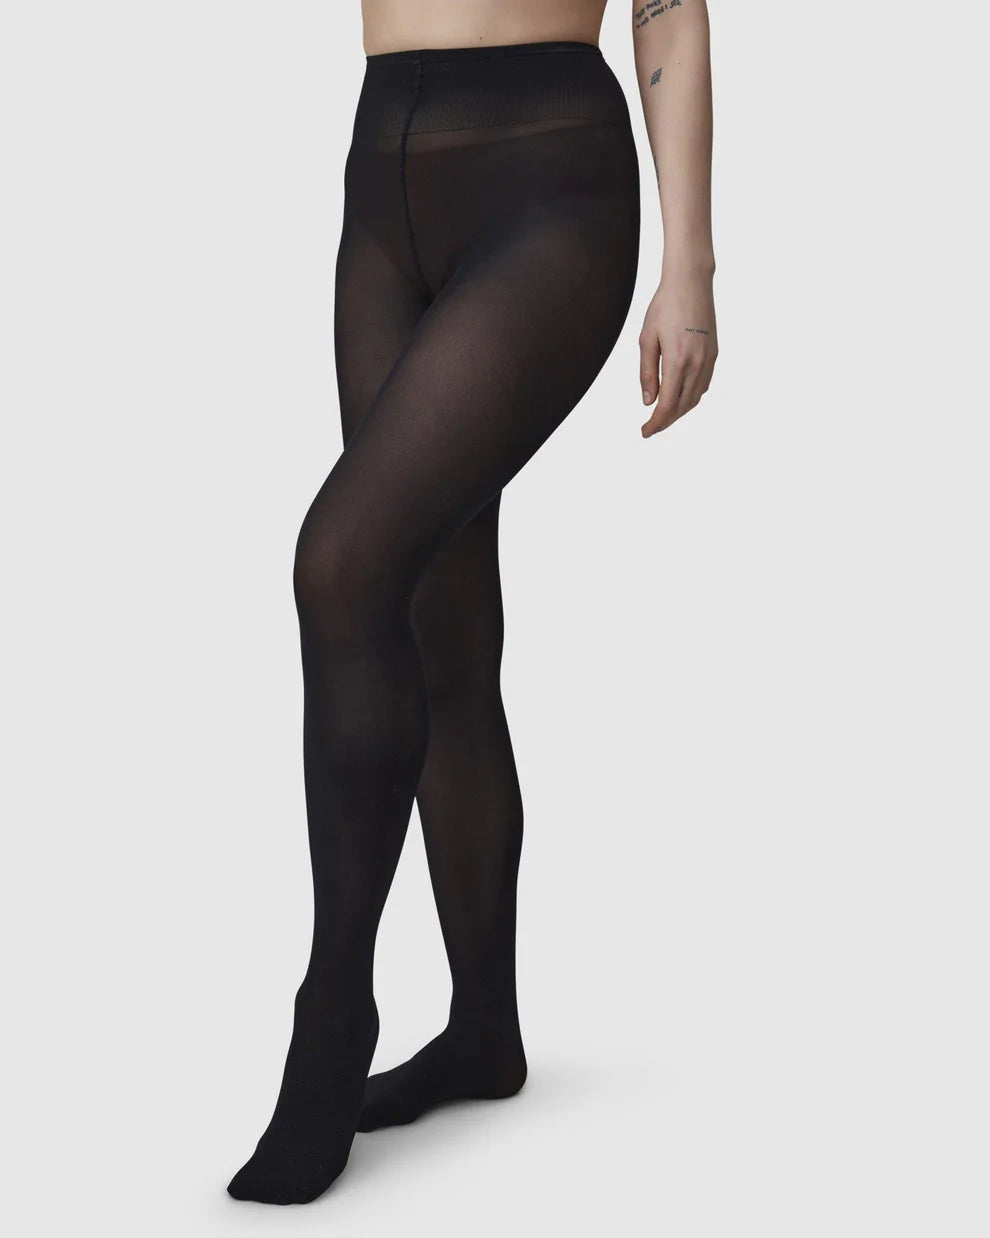 Black Footed Fleece Lined Tights - XS / Small Petite